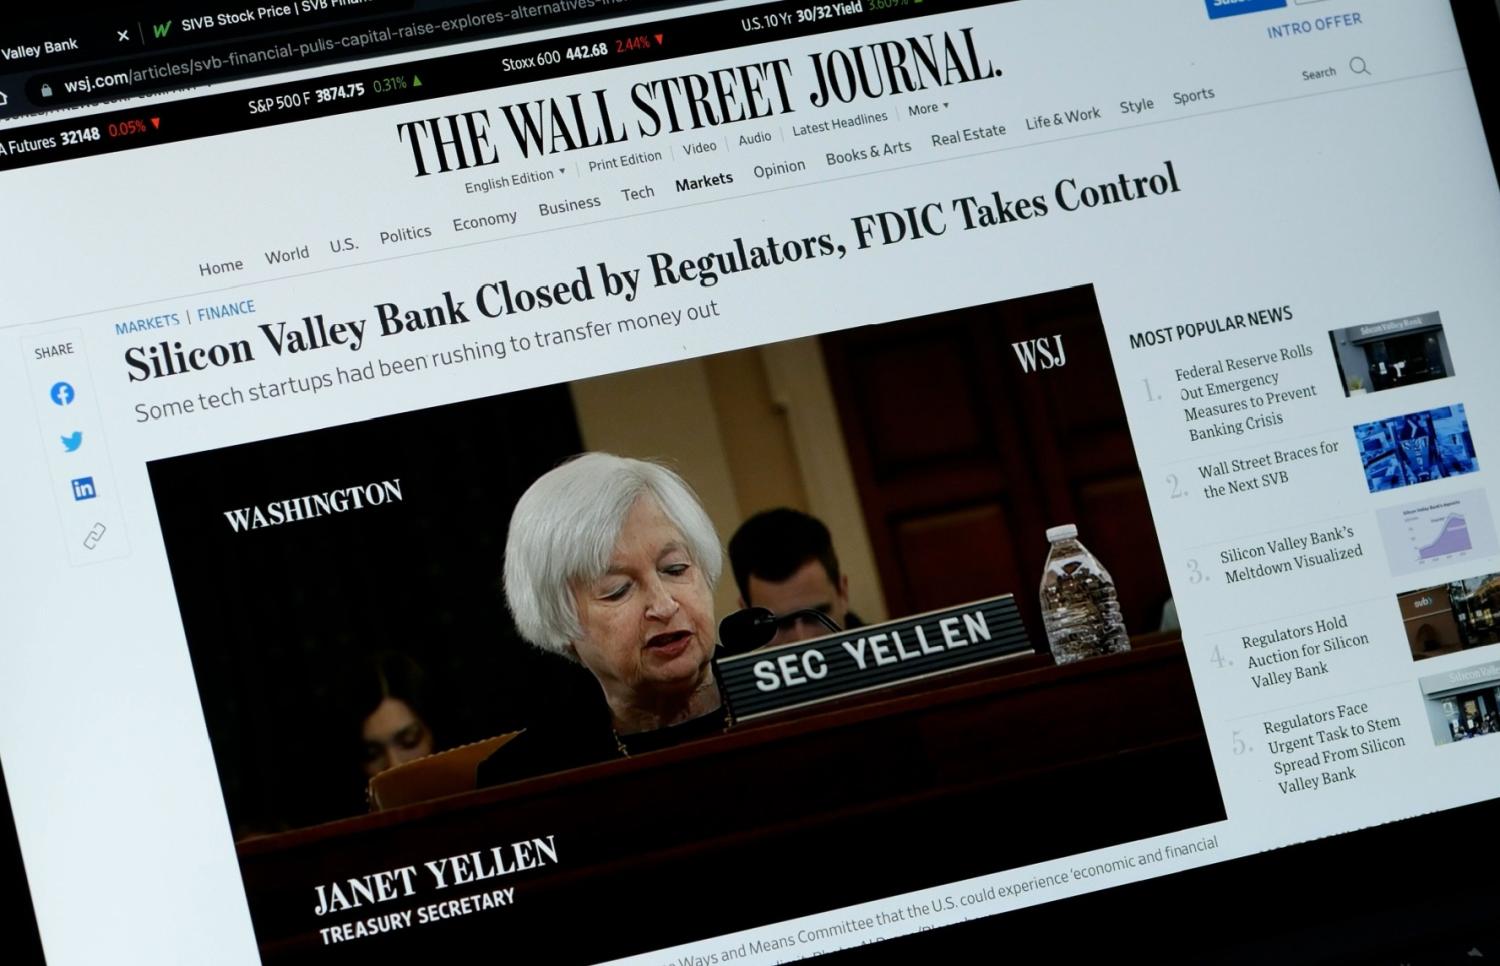 Treasury Secretary Janet Yellen on the front page of the Wall Street Journal